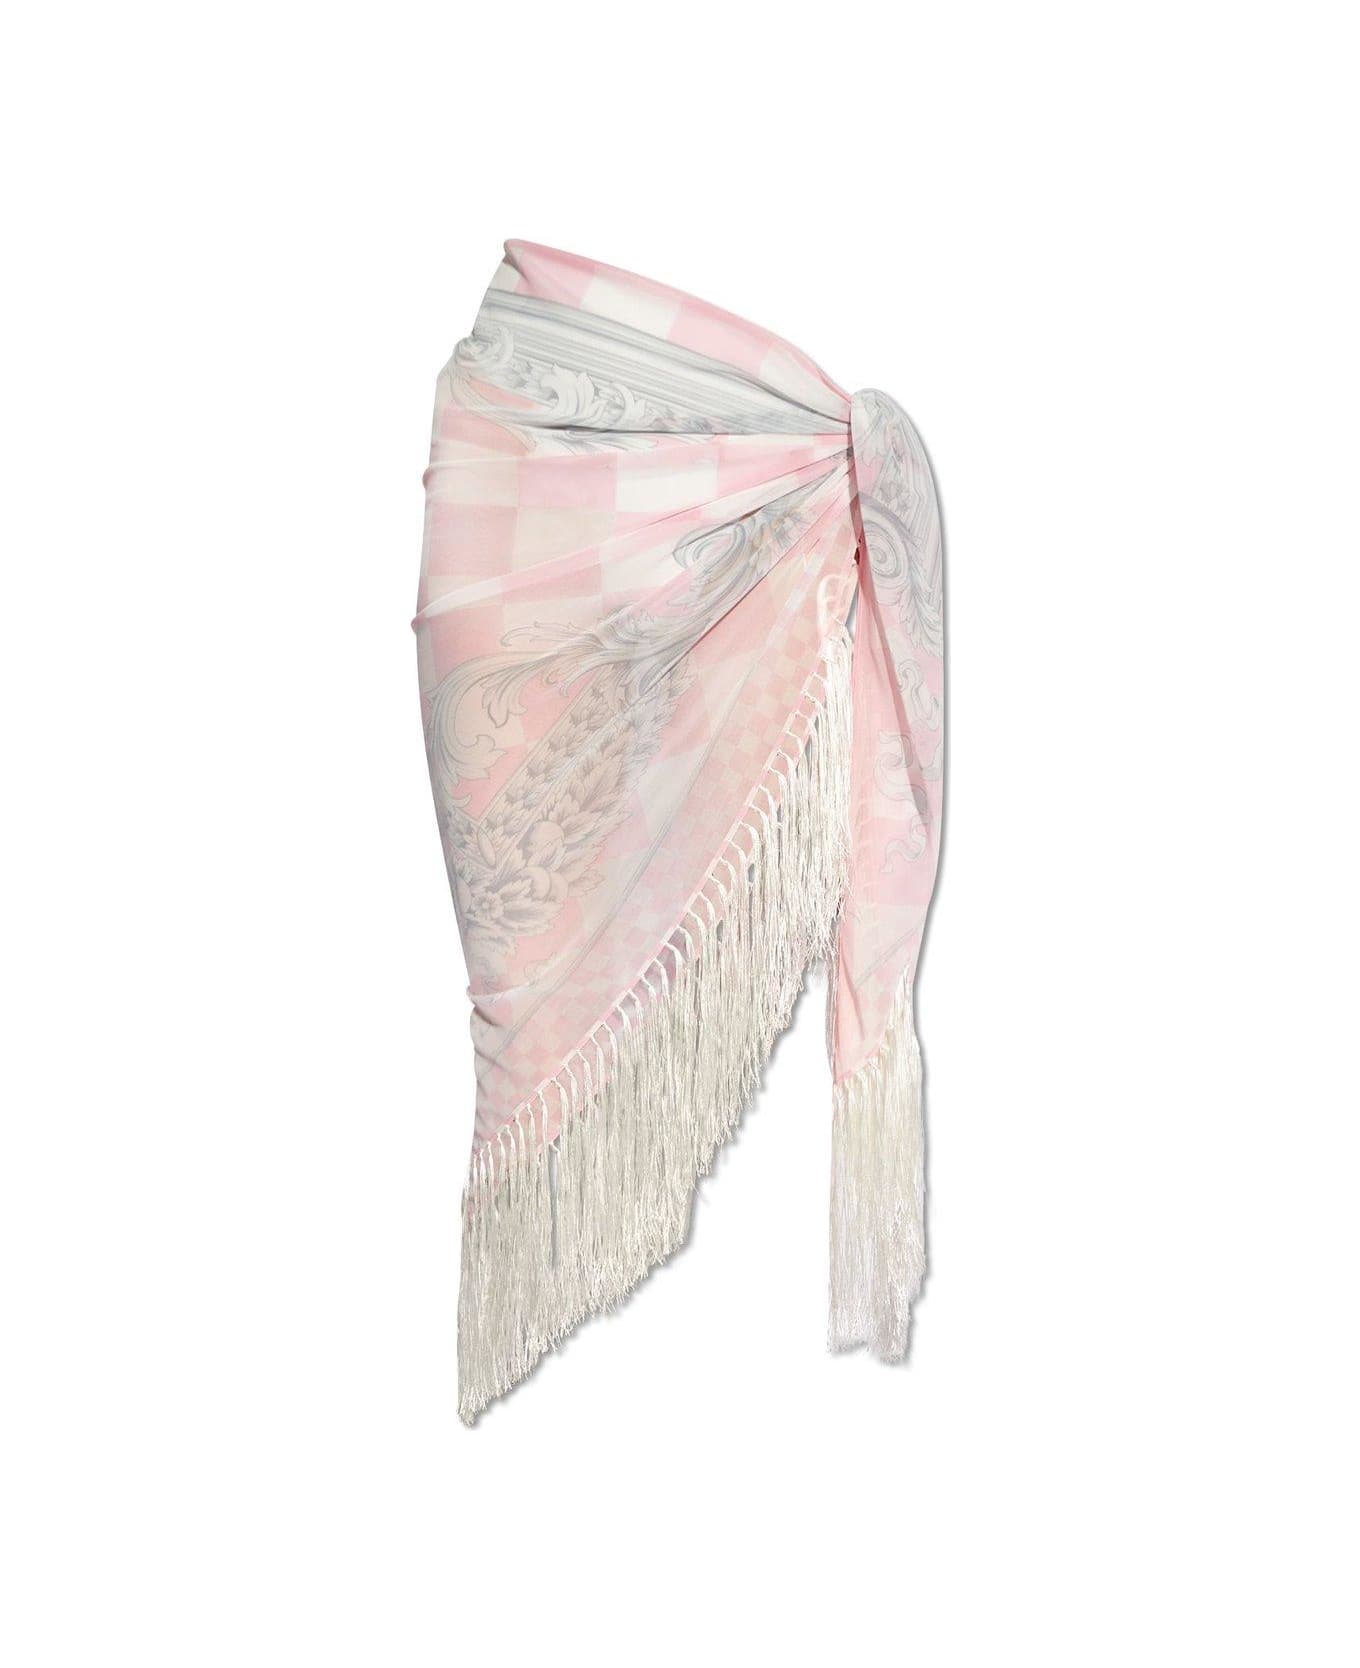 Versace Barocco-printed Fringed Cover-up - PINK/WHITE カバーアップ